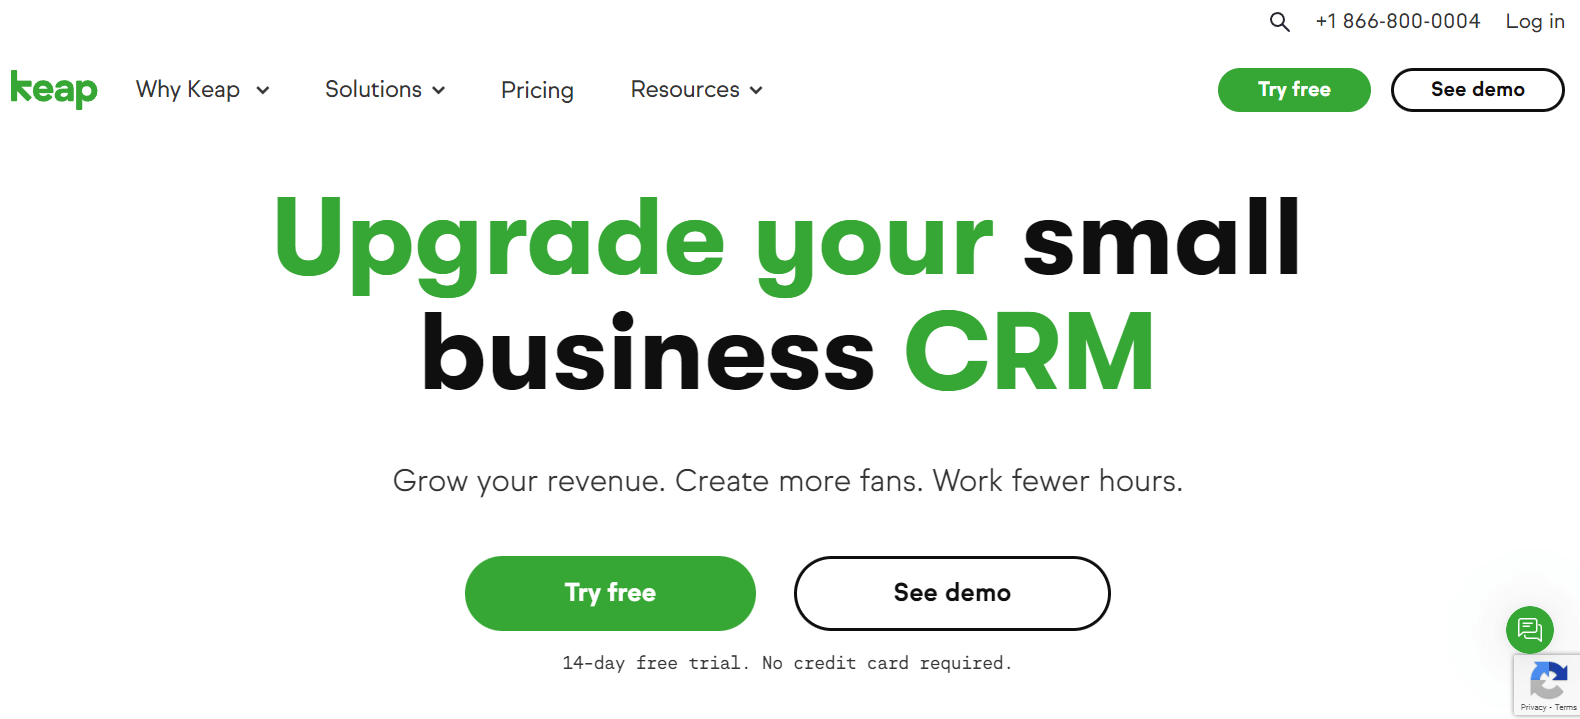 Keap is a comprehensive platform with email marketing, CRM, and more